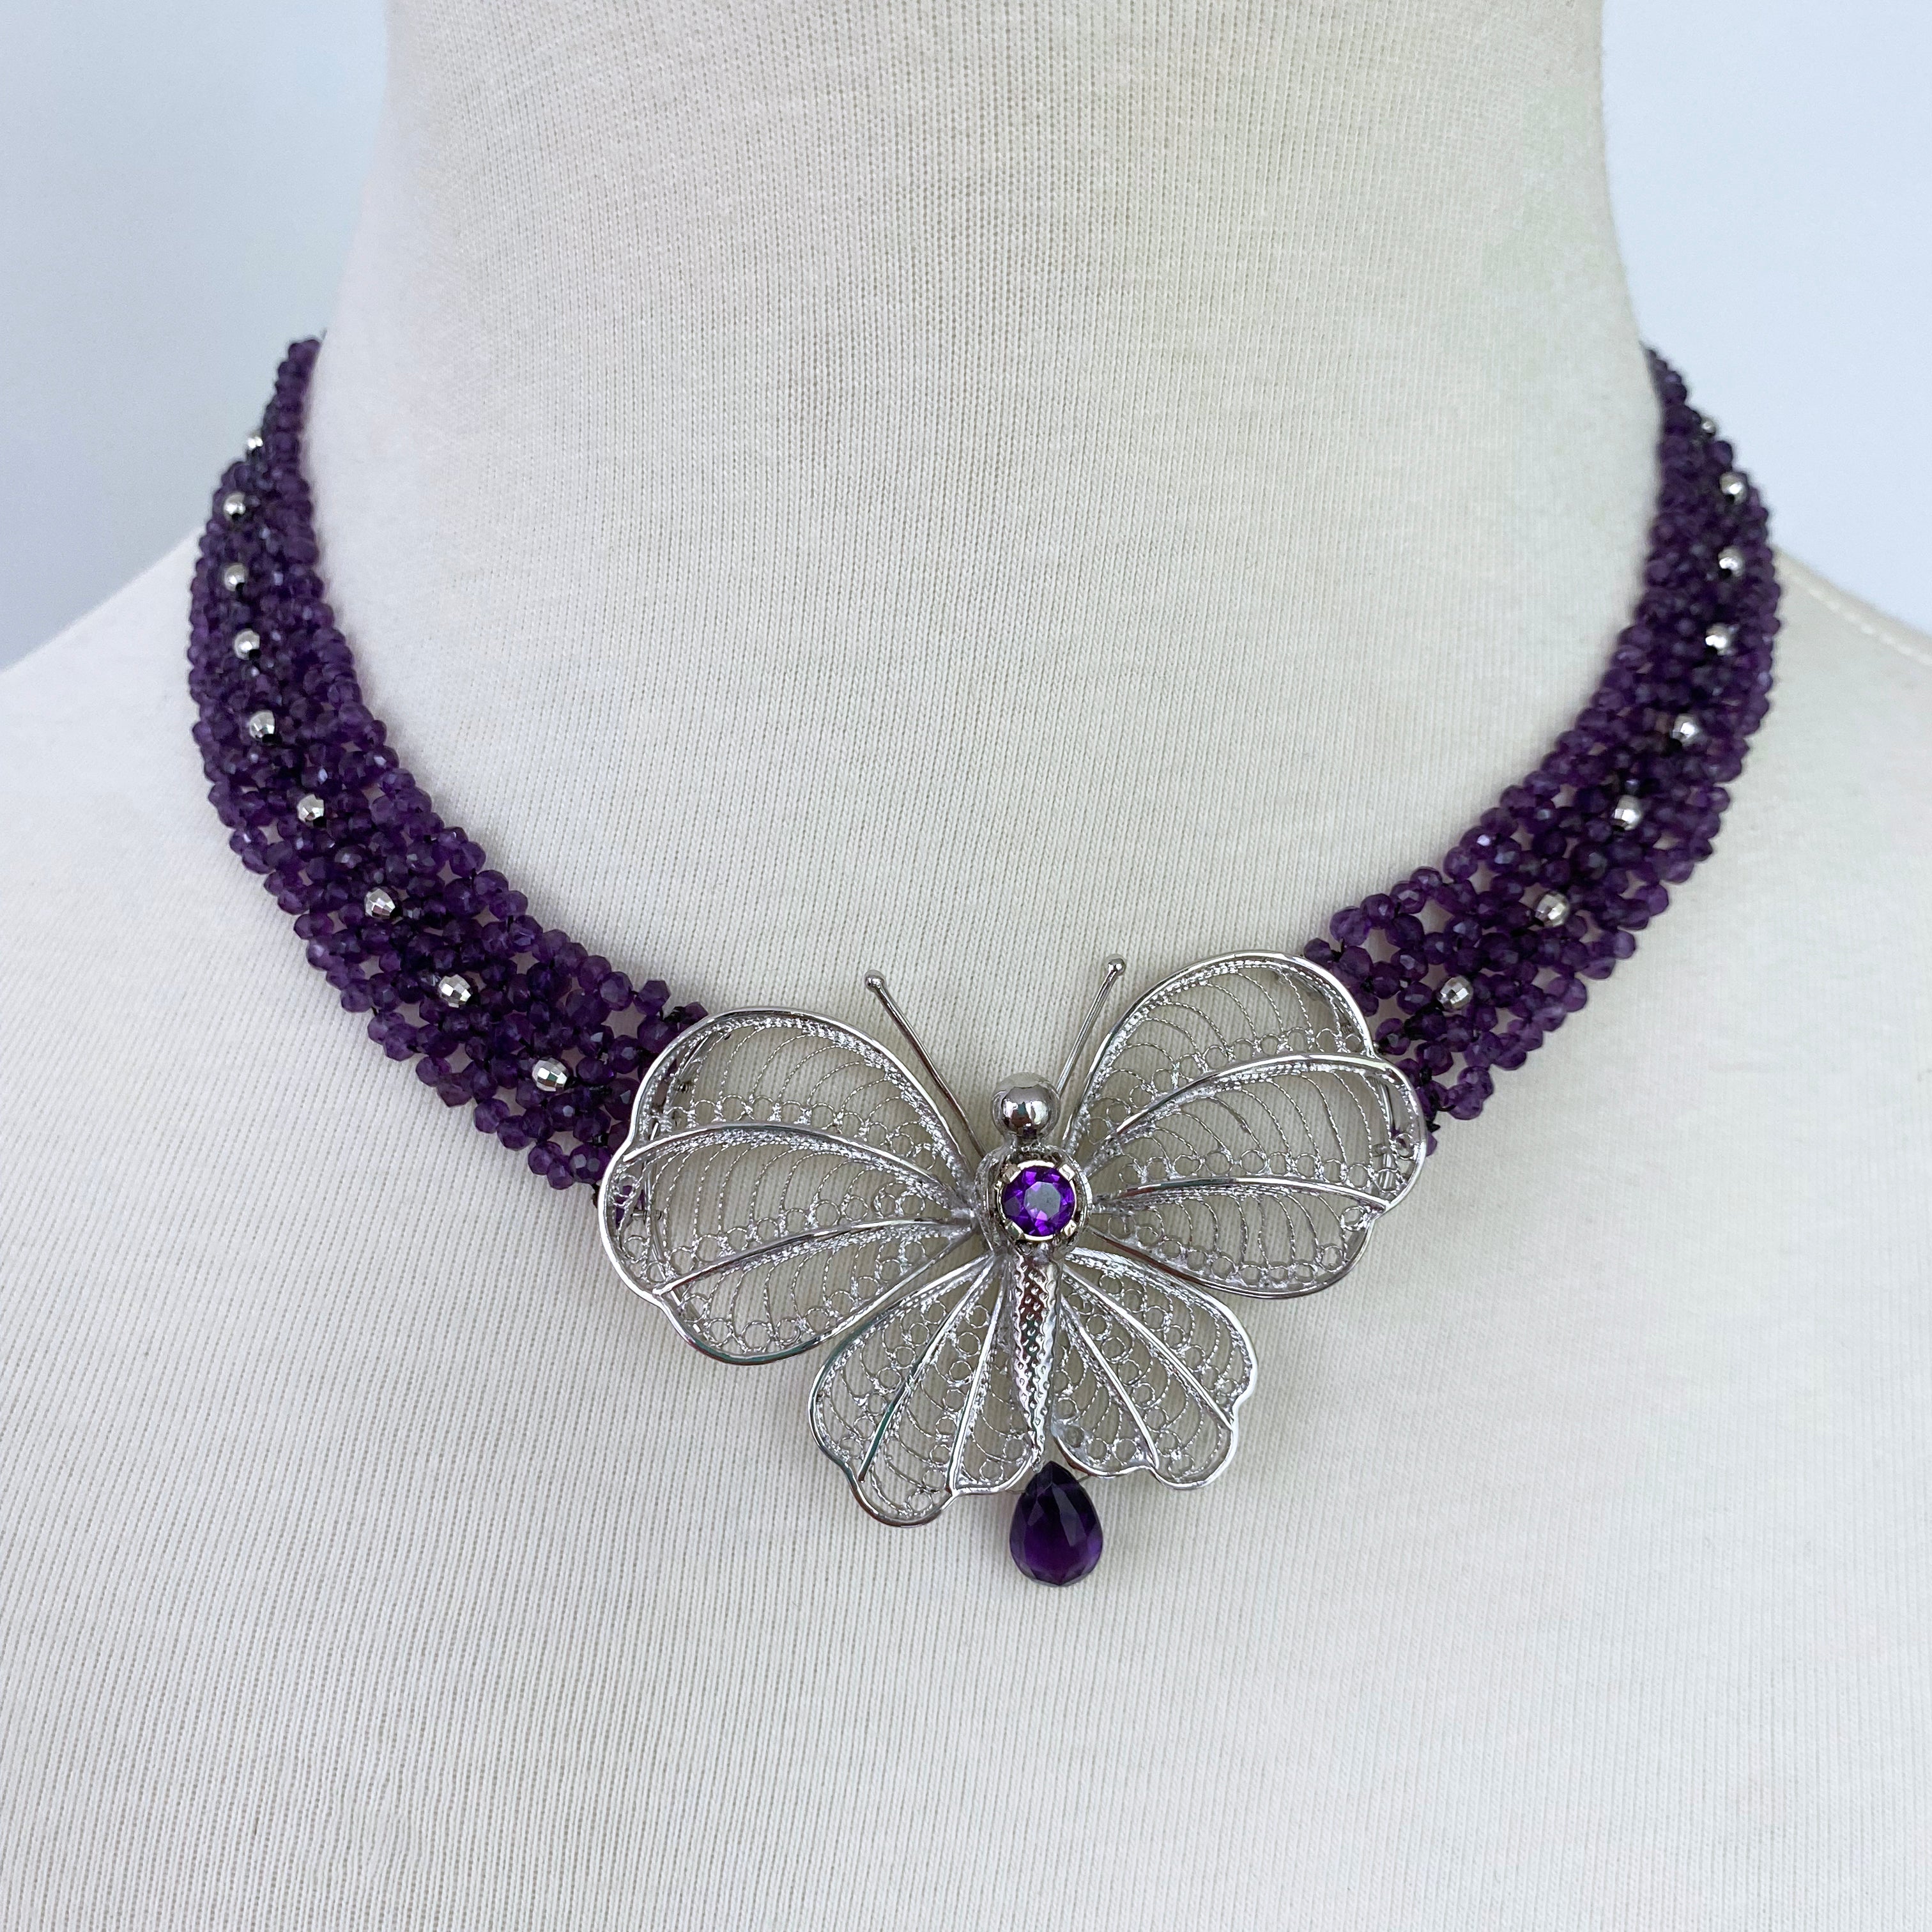 Woven Amethyst Necklace with Silver Butterfly Centerpiece For Sale